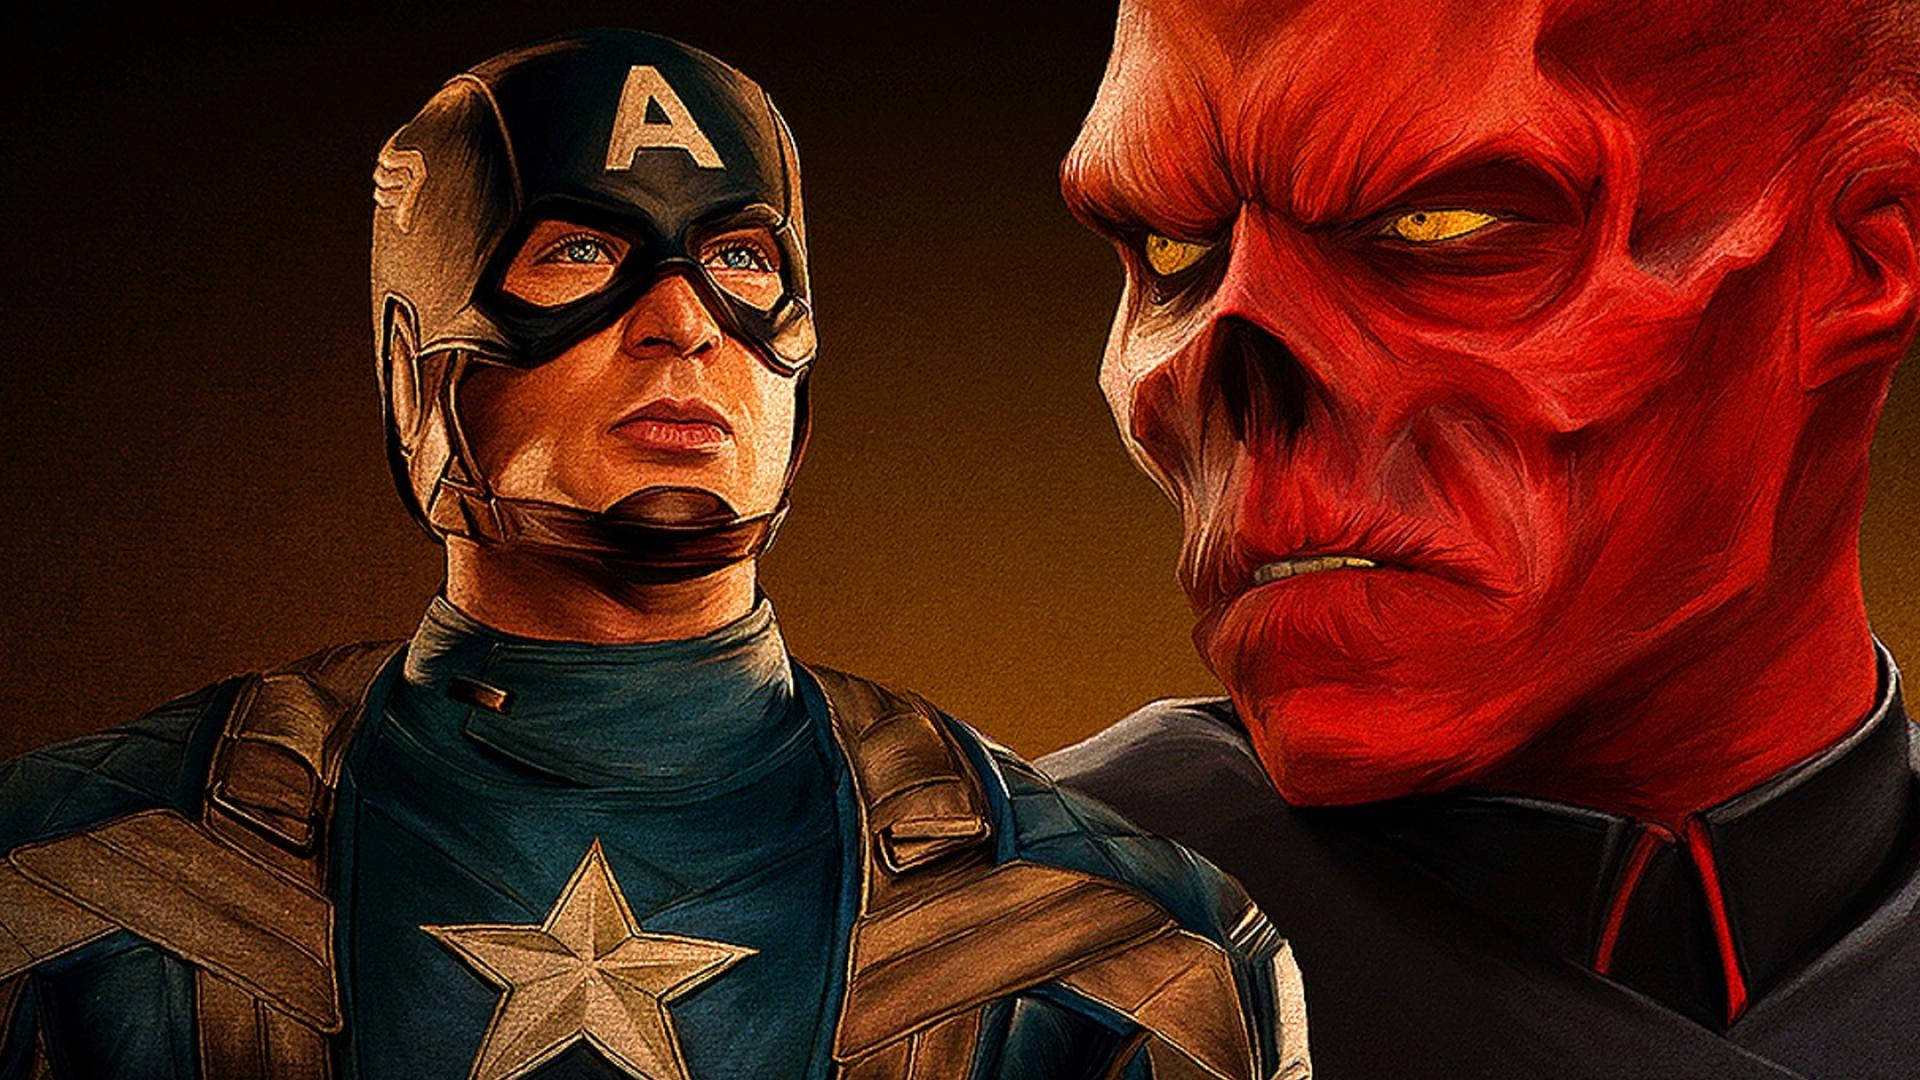 Red Skull 1920X1080 Wallpaper and Background Image